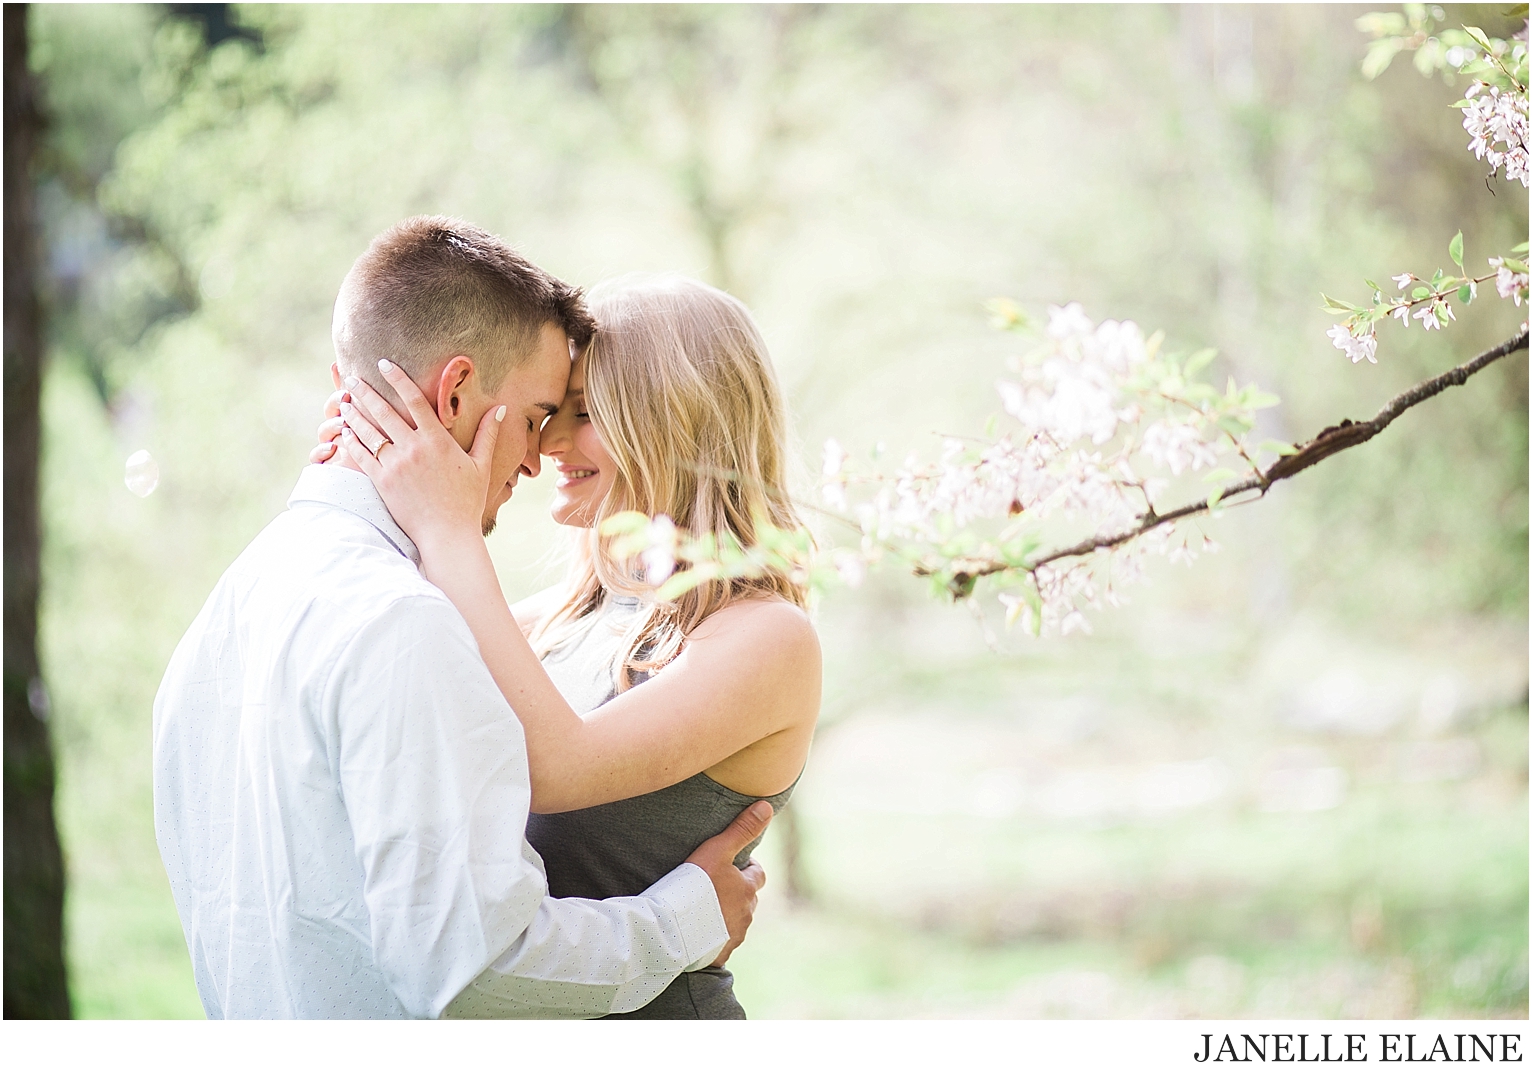 tricia and nate engagement photos-janelle elaine photography-76.jpg